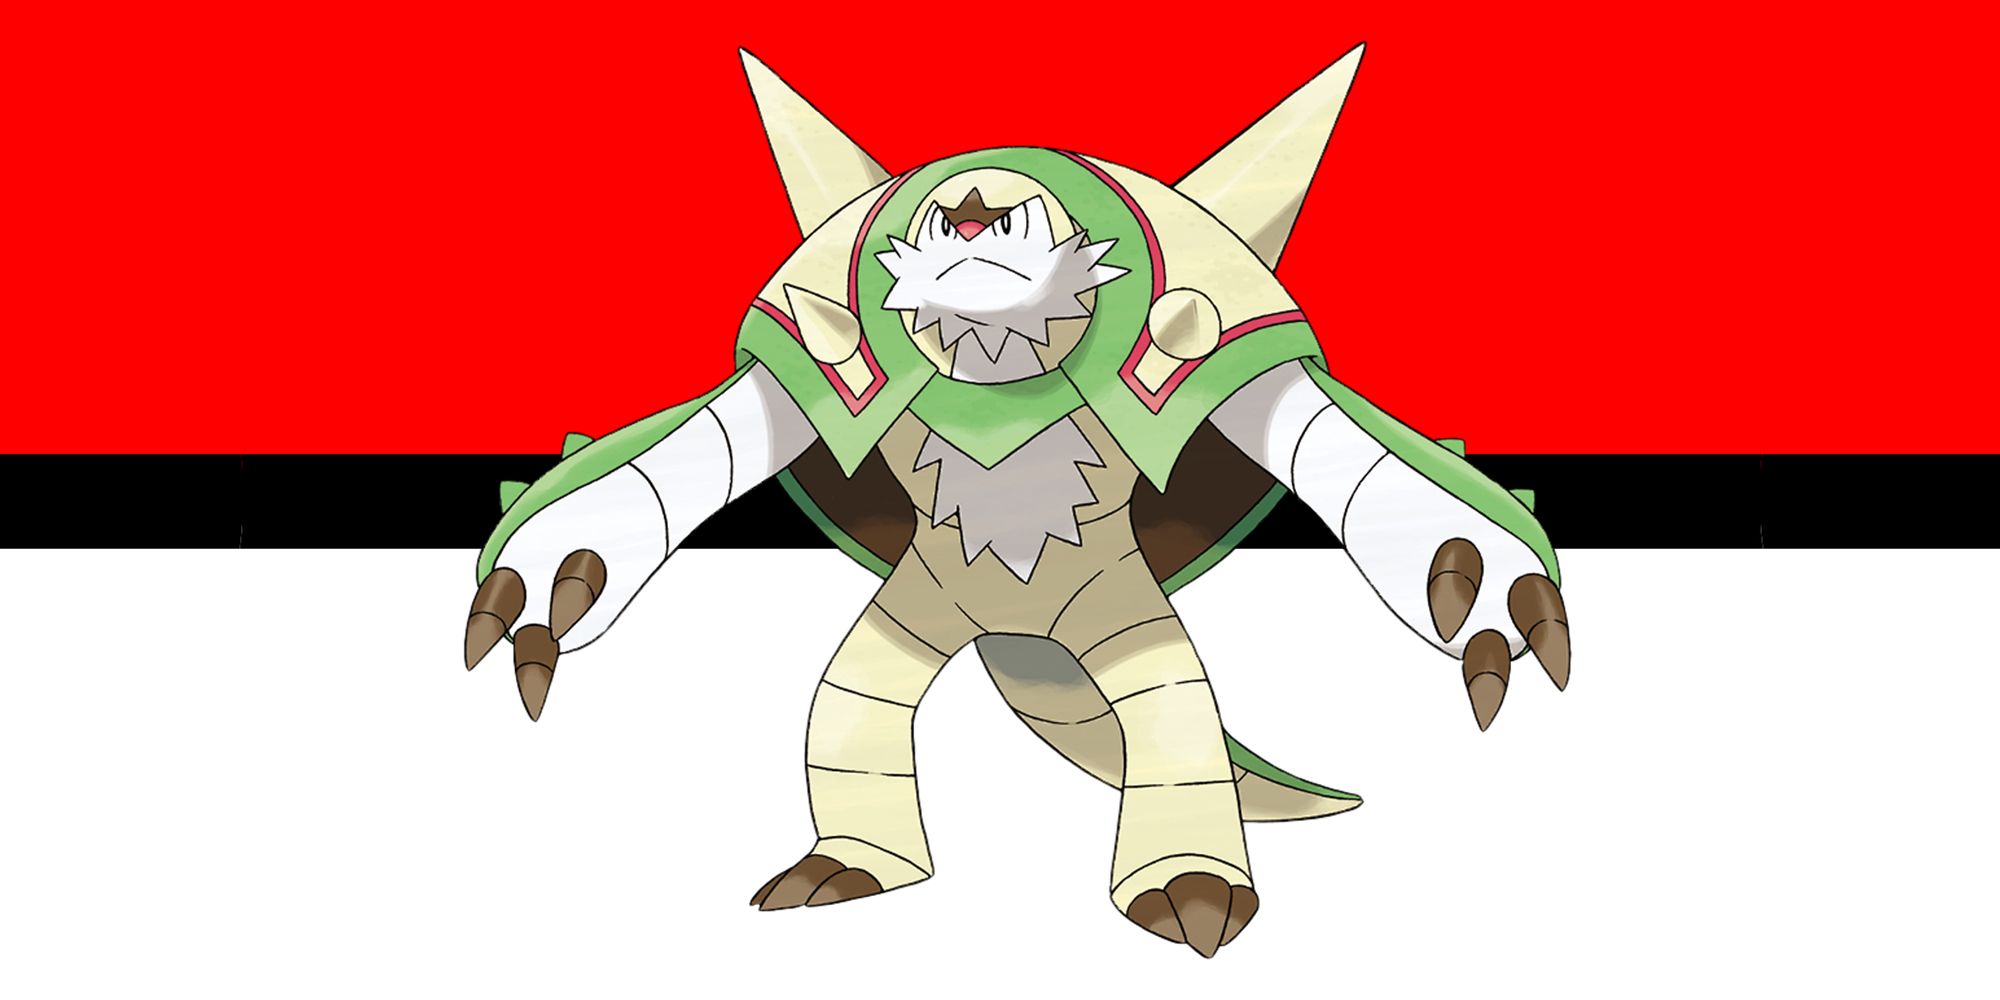 Chestnaught standing in front of a background fashioned after a Poké Ball color scheme.